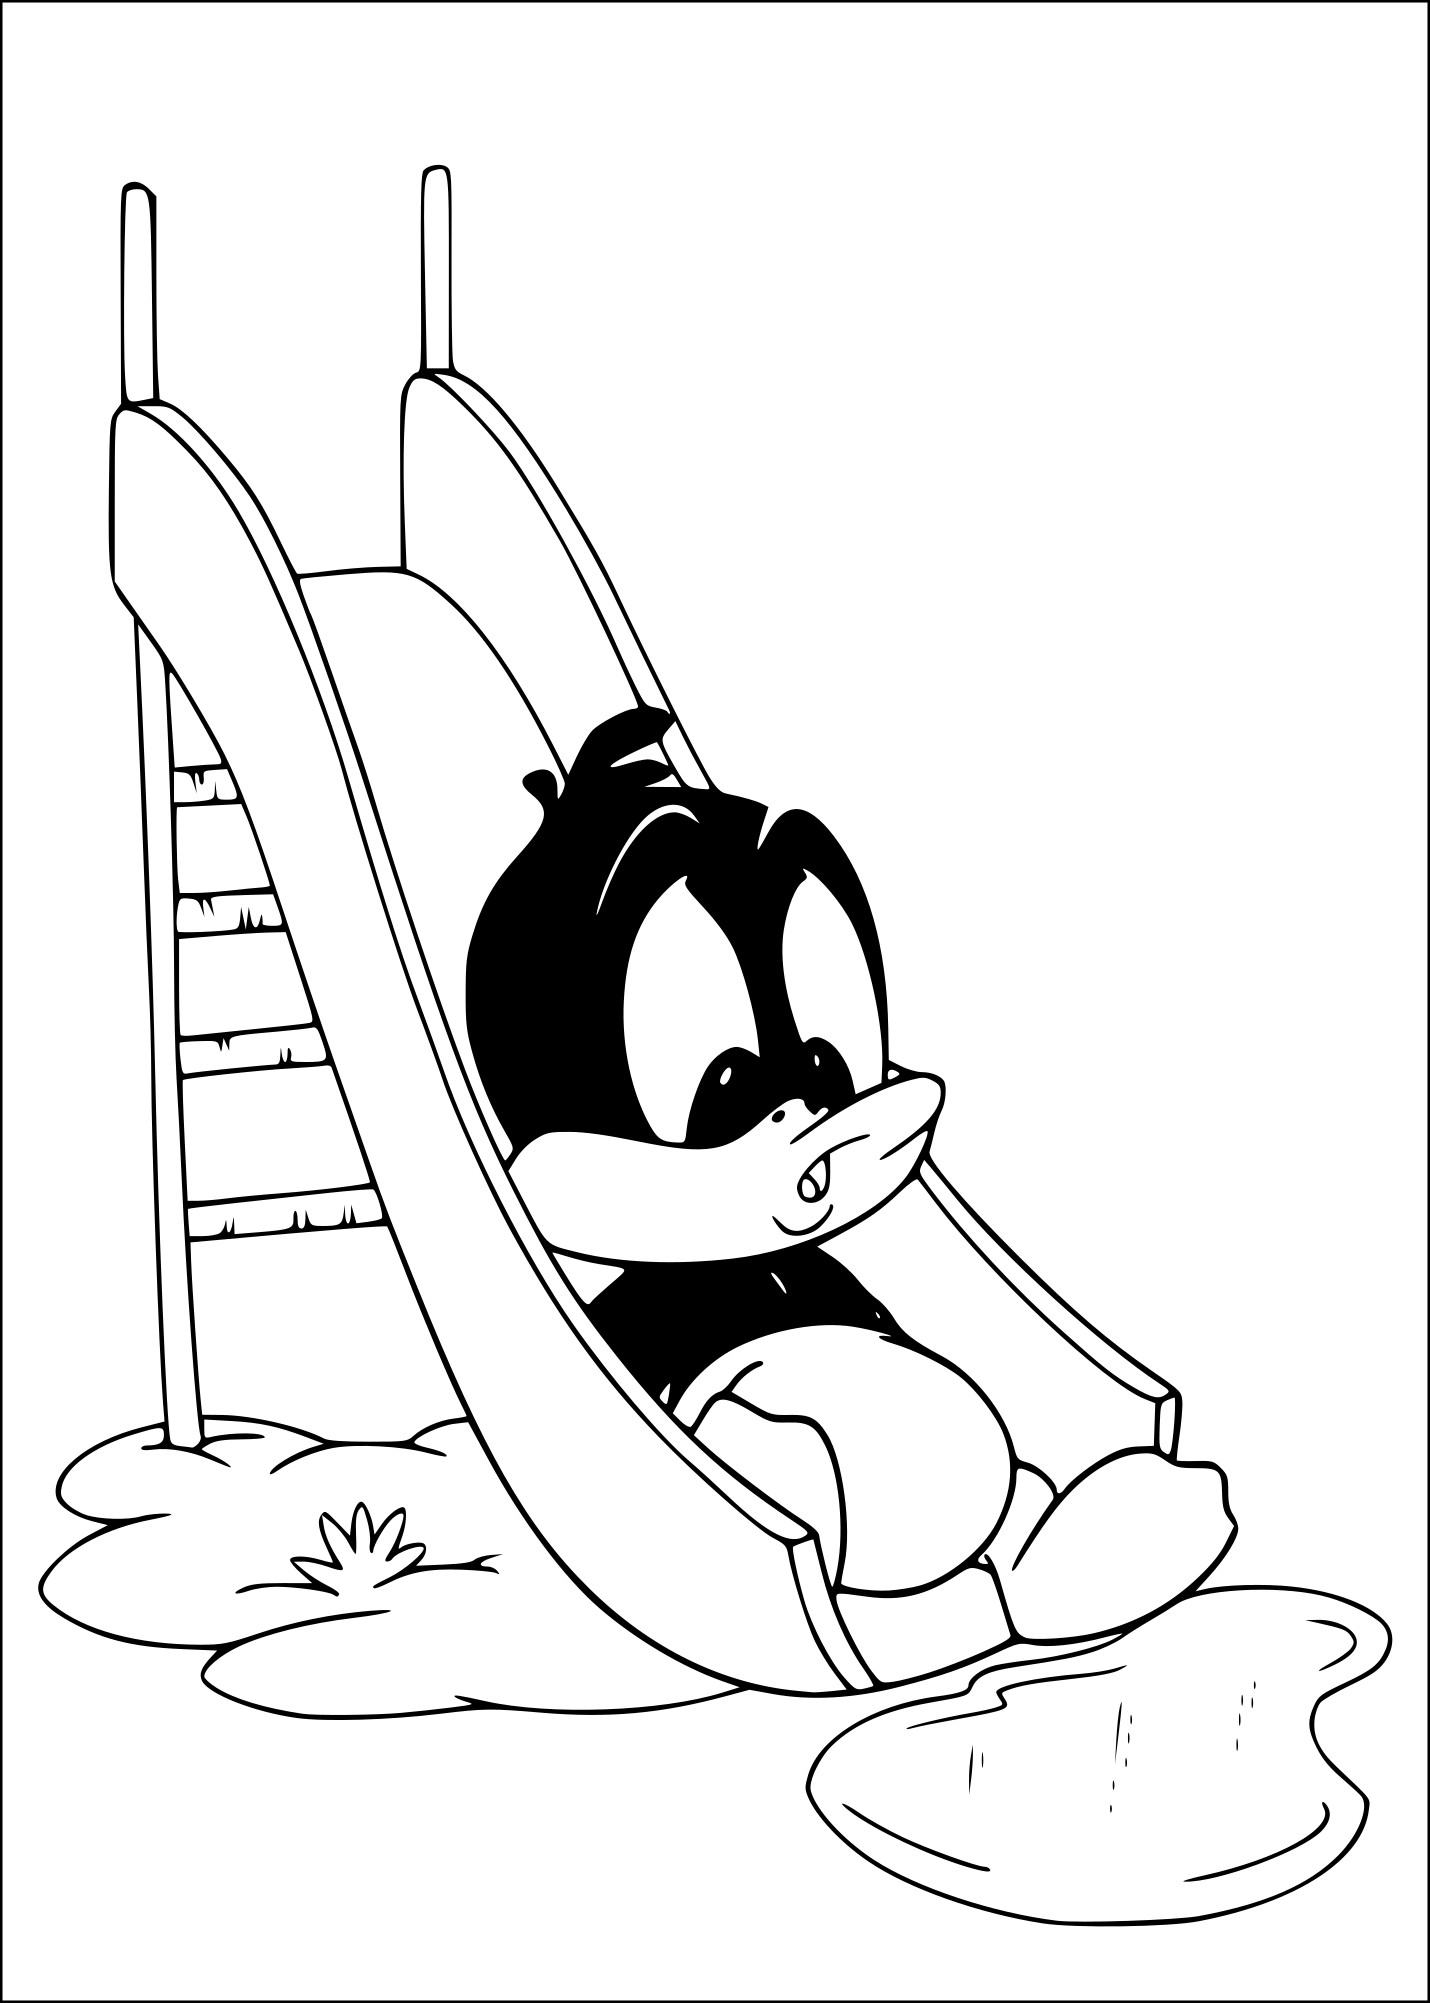 Looney Tunes Daffy Duck coloring page